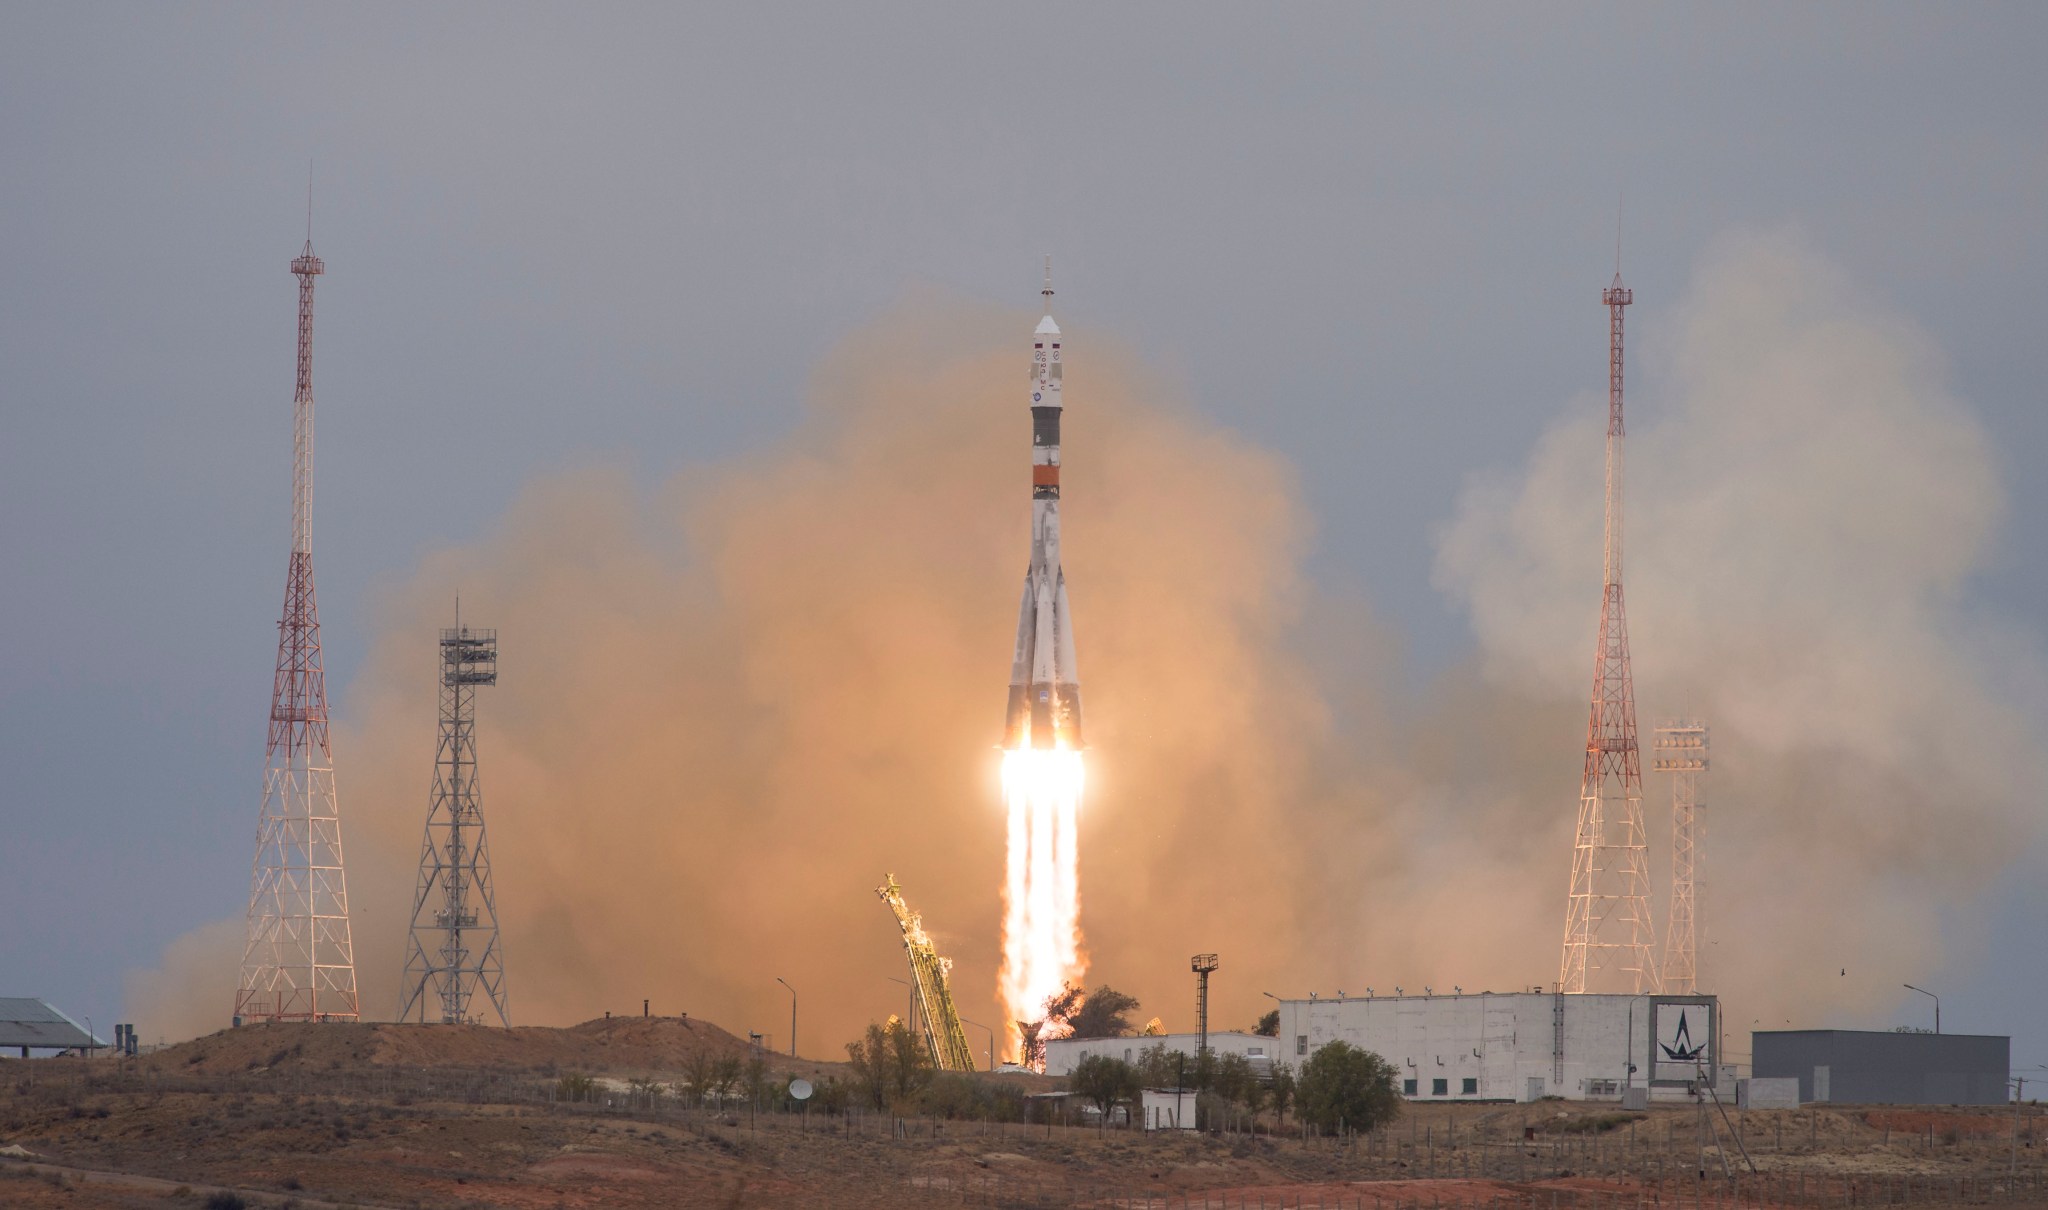 Launch of Expedition 49 crew to ISS on Oct. 19, 2016.